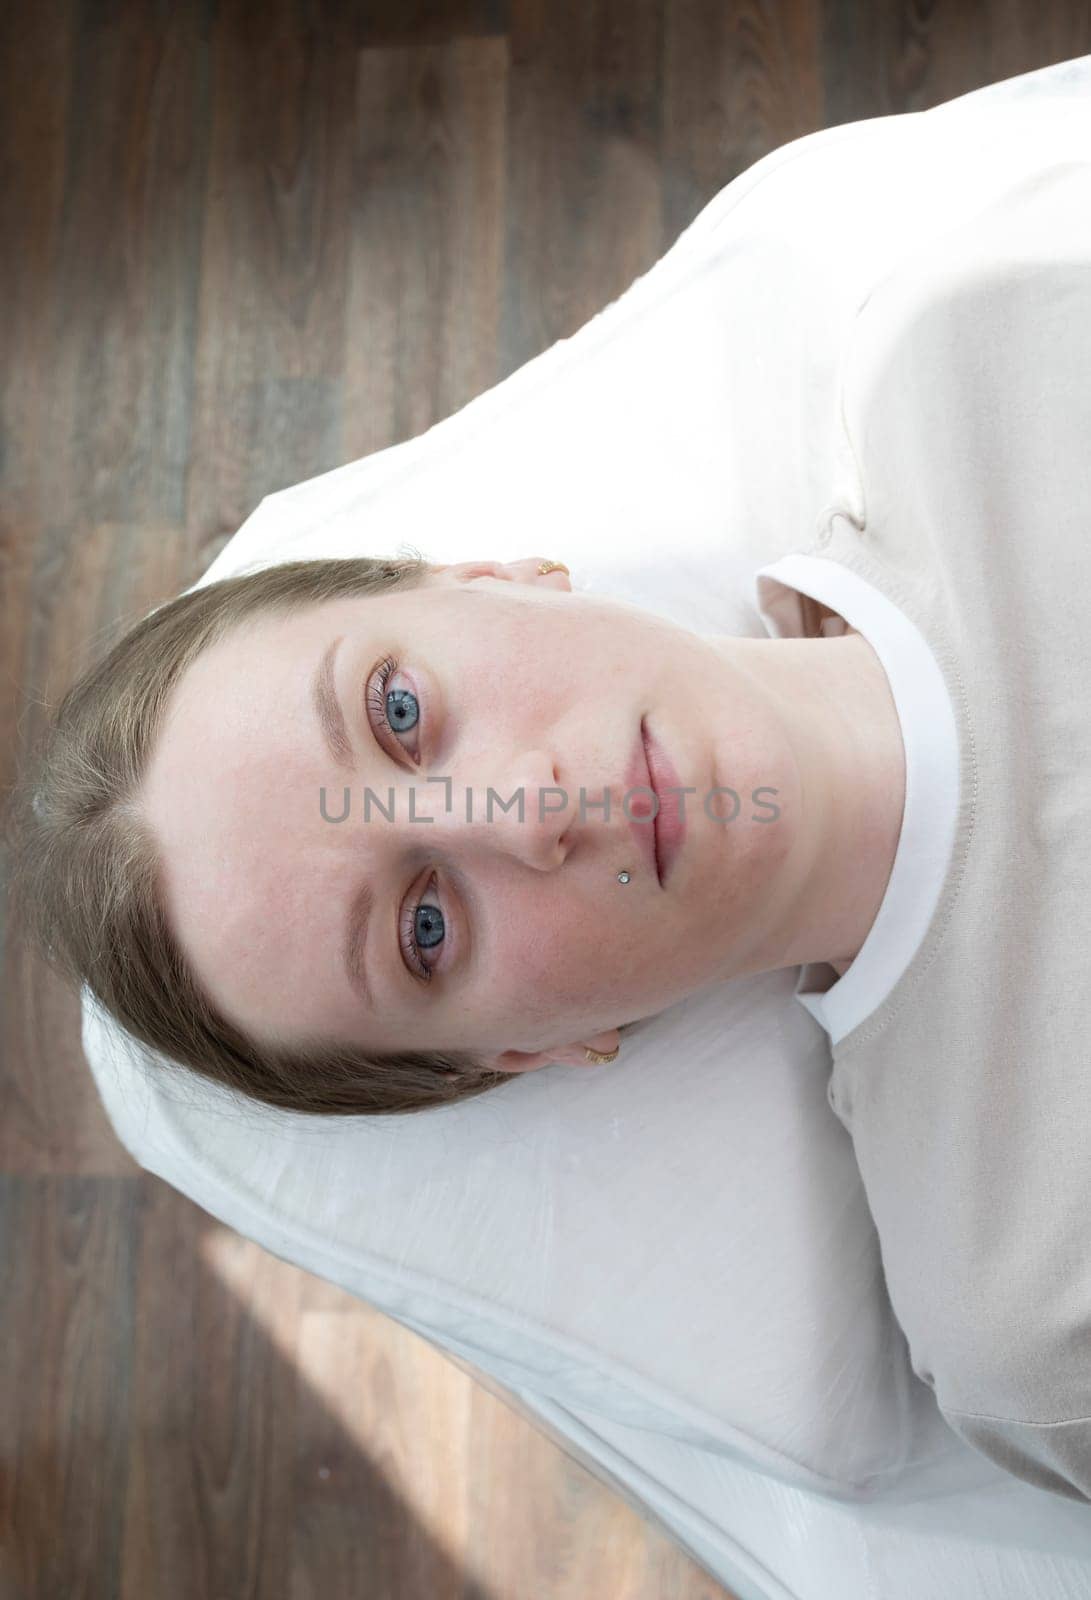 Portrait Of Caucasian Young Woman After Eyelash Lamination Procedure, Lash Treatment Lying on Couch. Top View. Vertical Plane High quality photo by netatsi